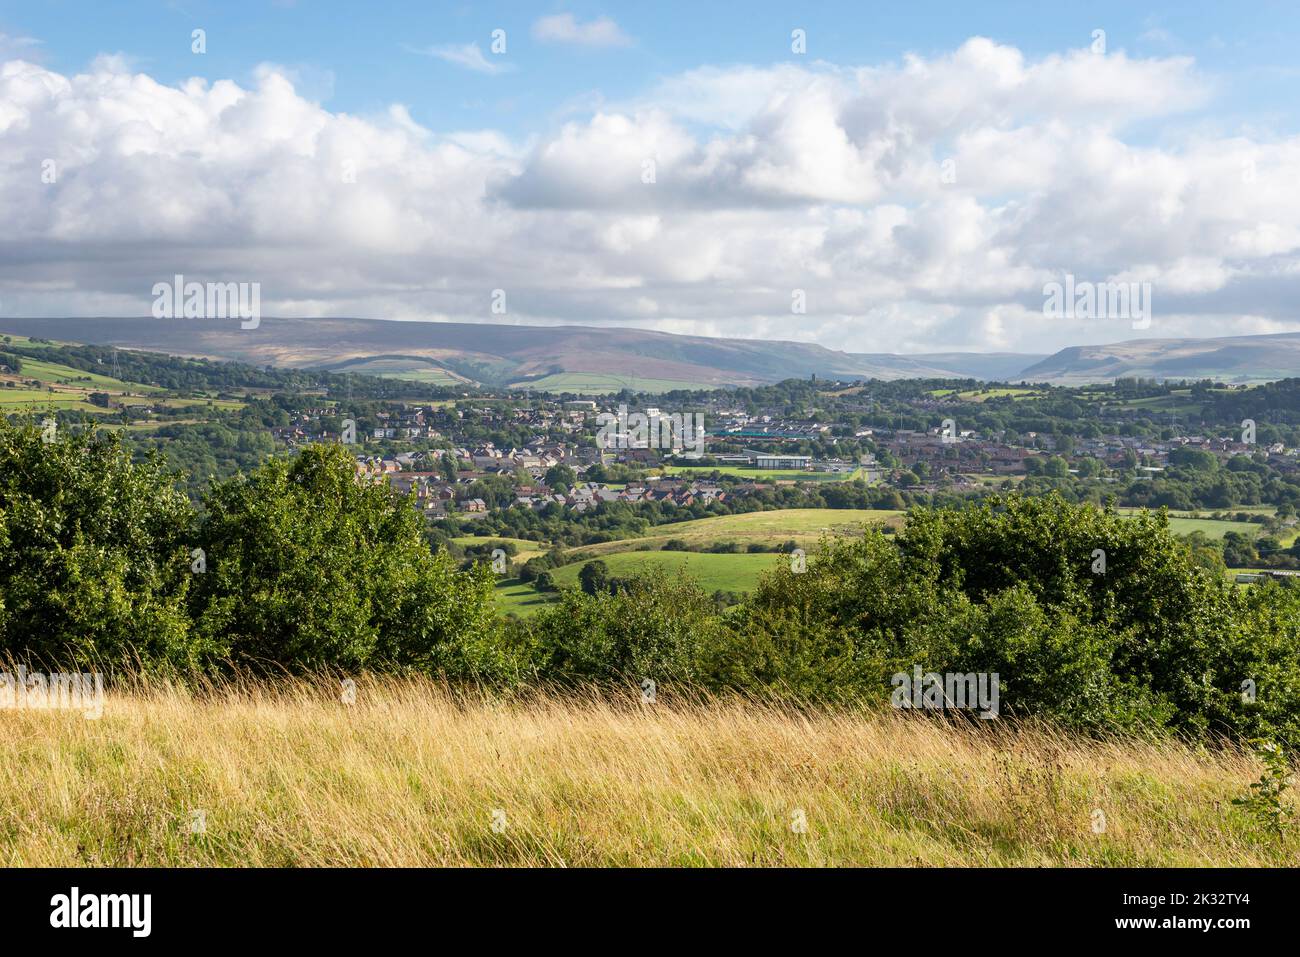 View of Mottram in Longdendale and Hattersley from Werneth Low country park near Hyde in Tameside, Greater Manchester. Stock Photo